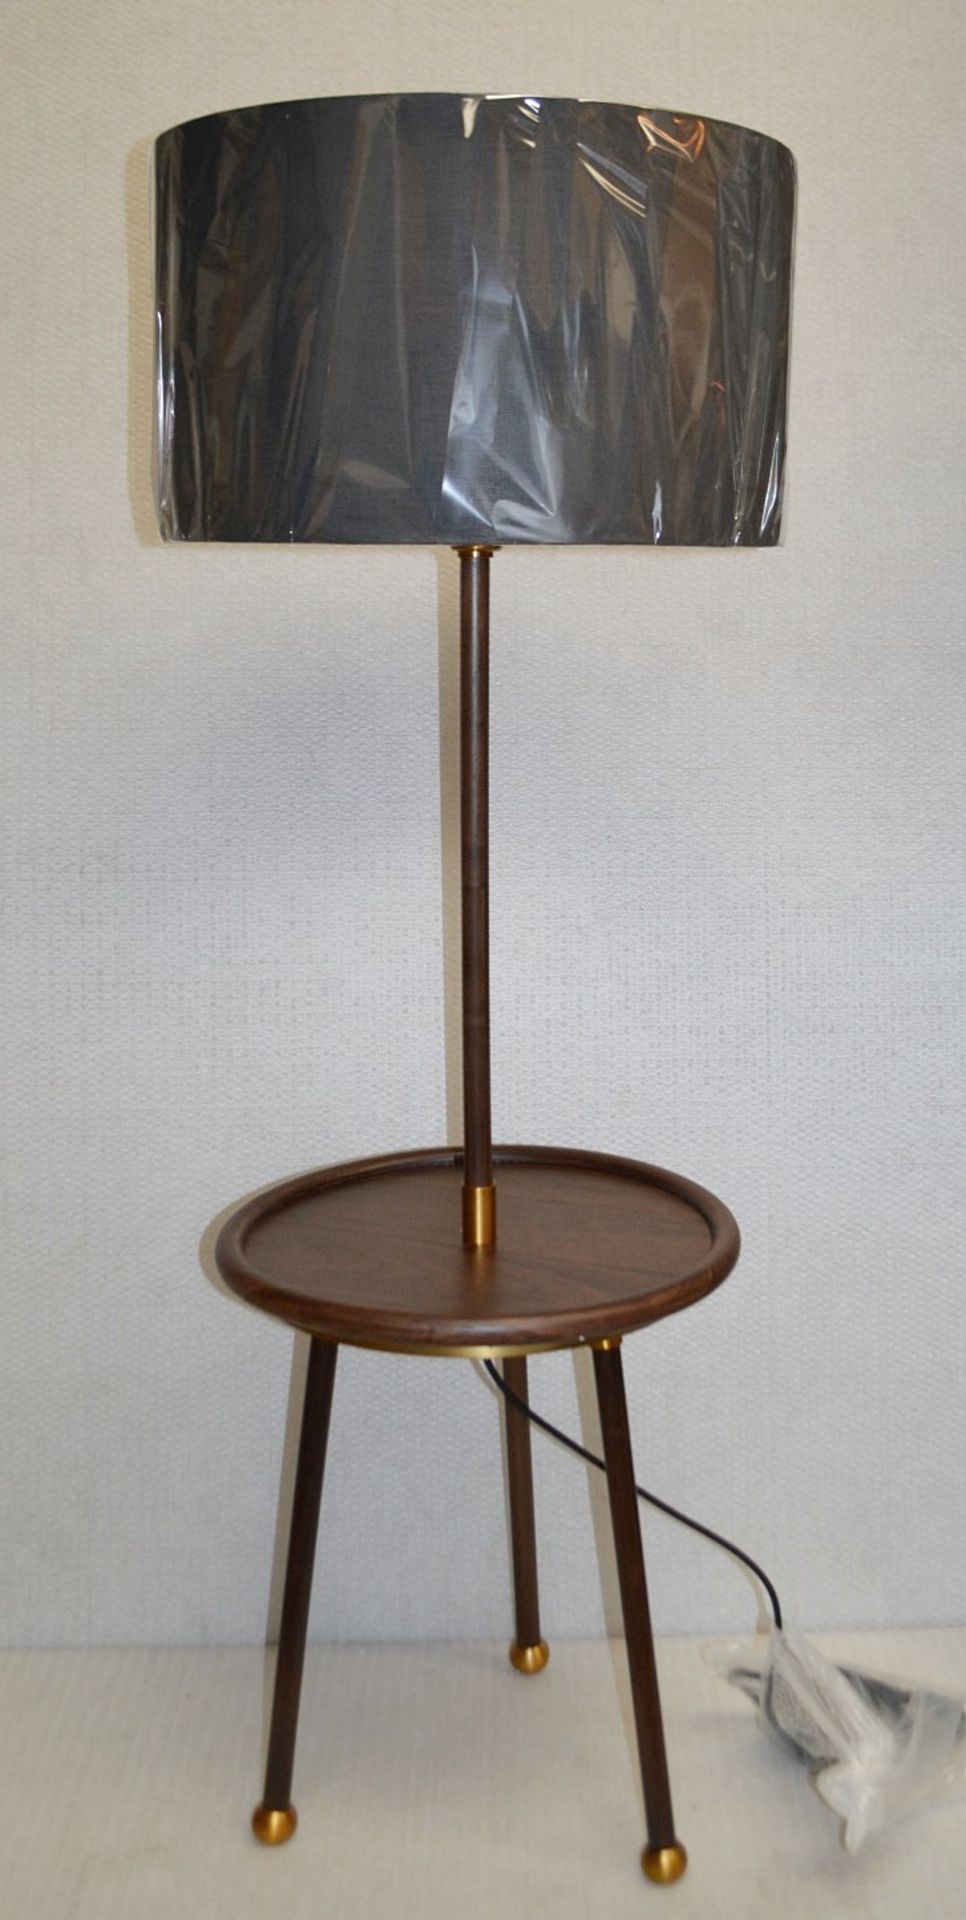 1 x CHELSOM Freestanding Lamp With Table And A Black Shade - Unused Boxed Stock - Dimensions: H143cm - Image 2 of 16